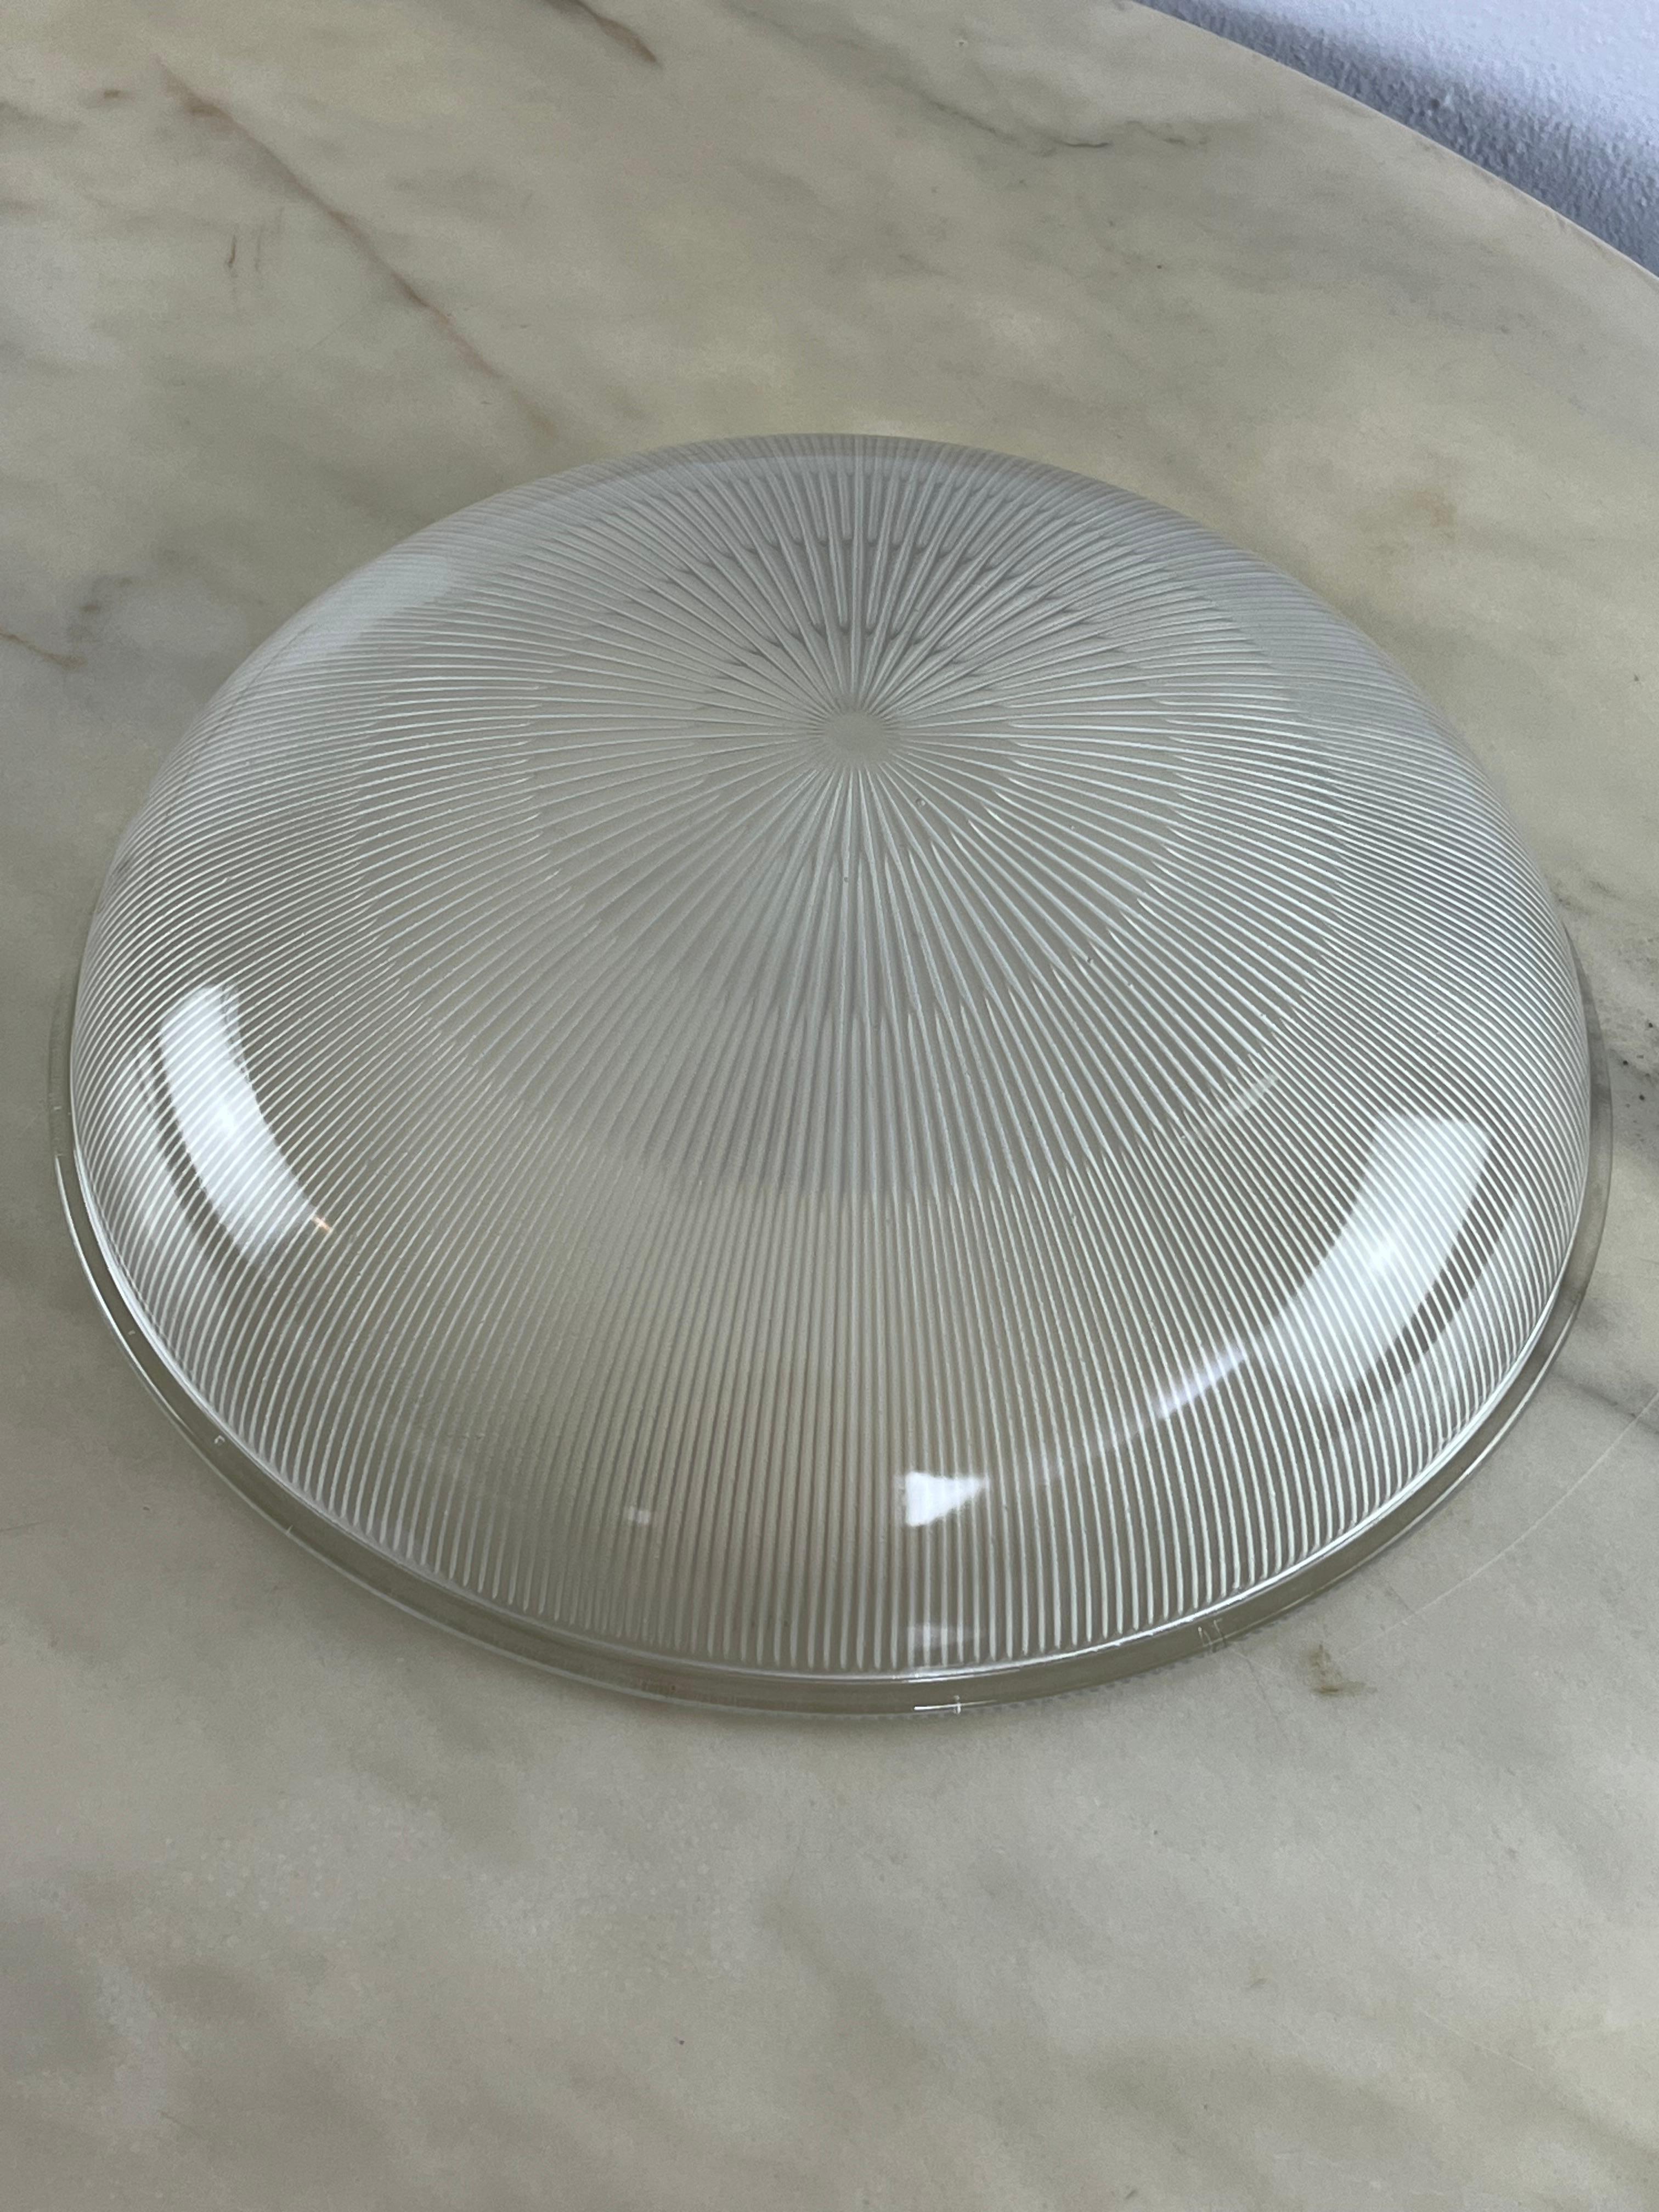 Metal Mid-Century Round Ceiling Light In The Style Of Luigi Caccia Dominioni 1960s For Sale